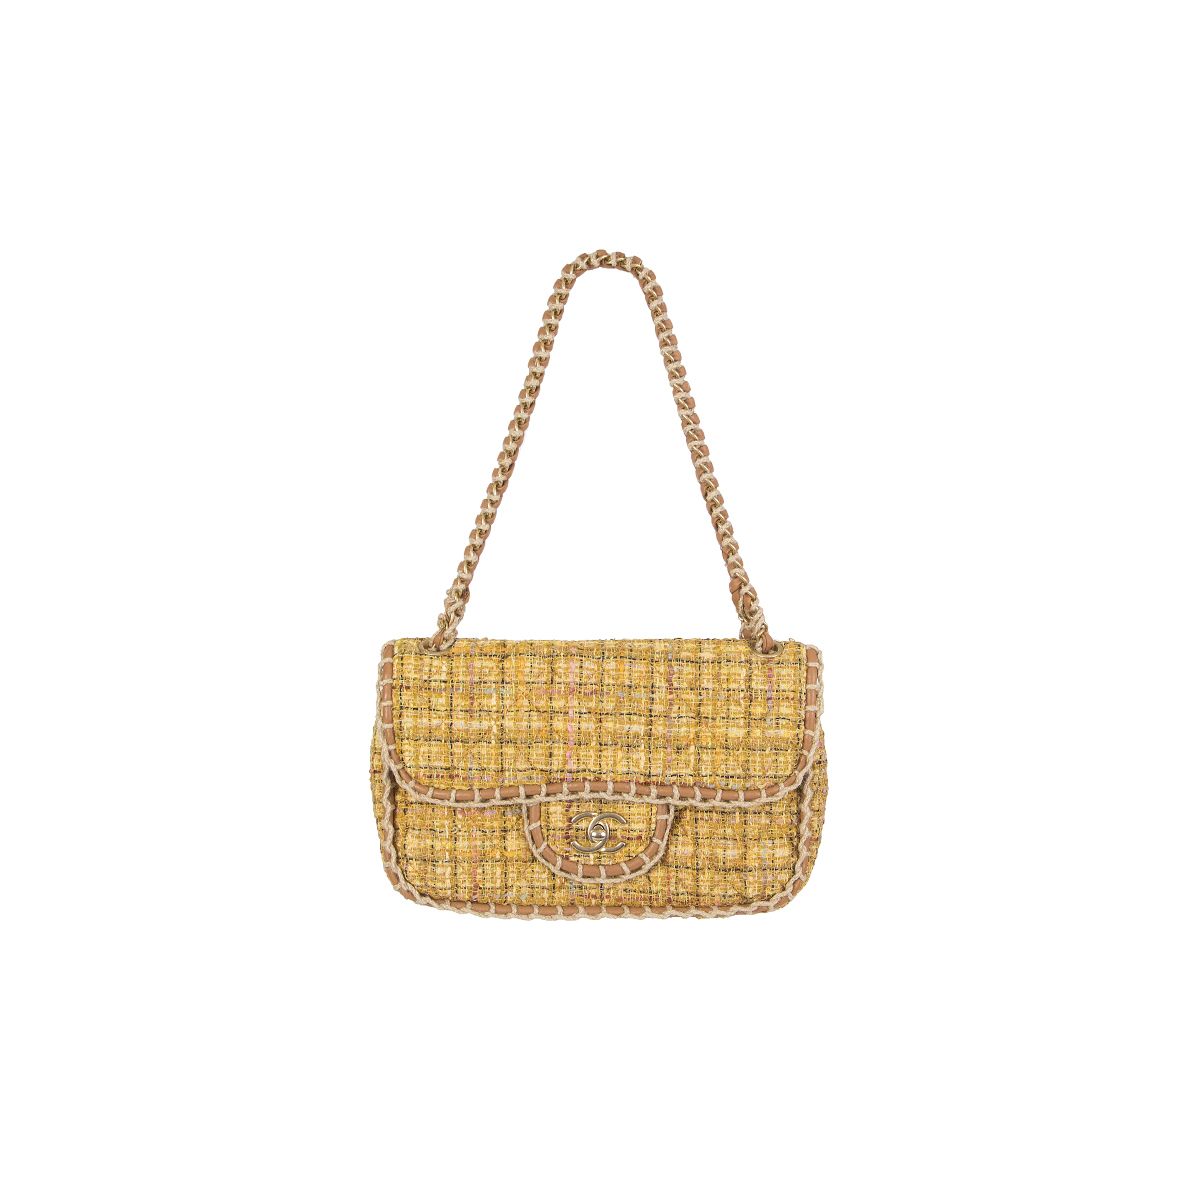 CHANEL, Bags, Chanel Yellow Mustard Embroidered Shoulder Bag